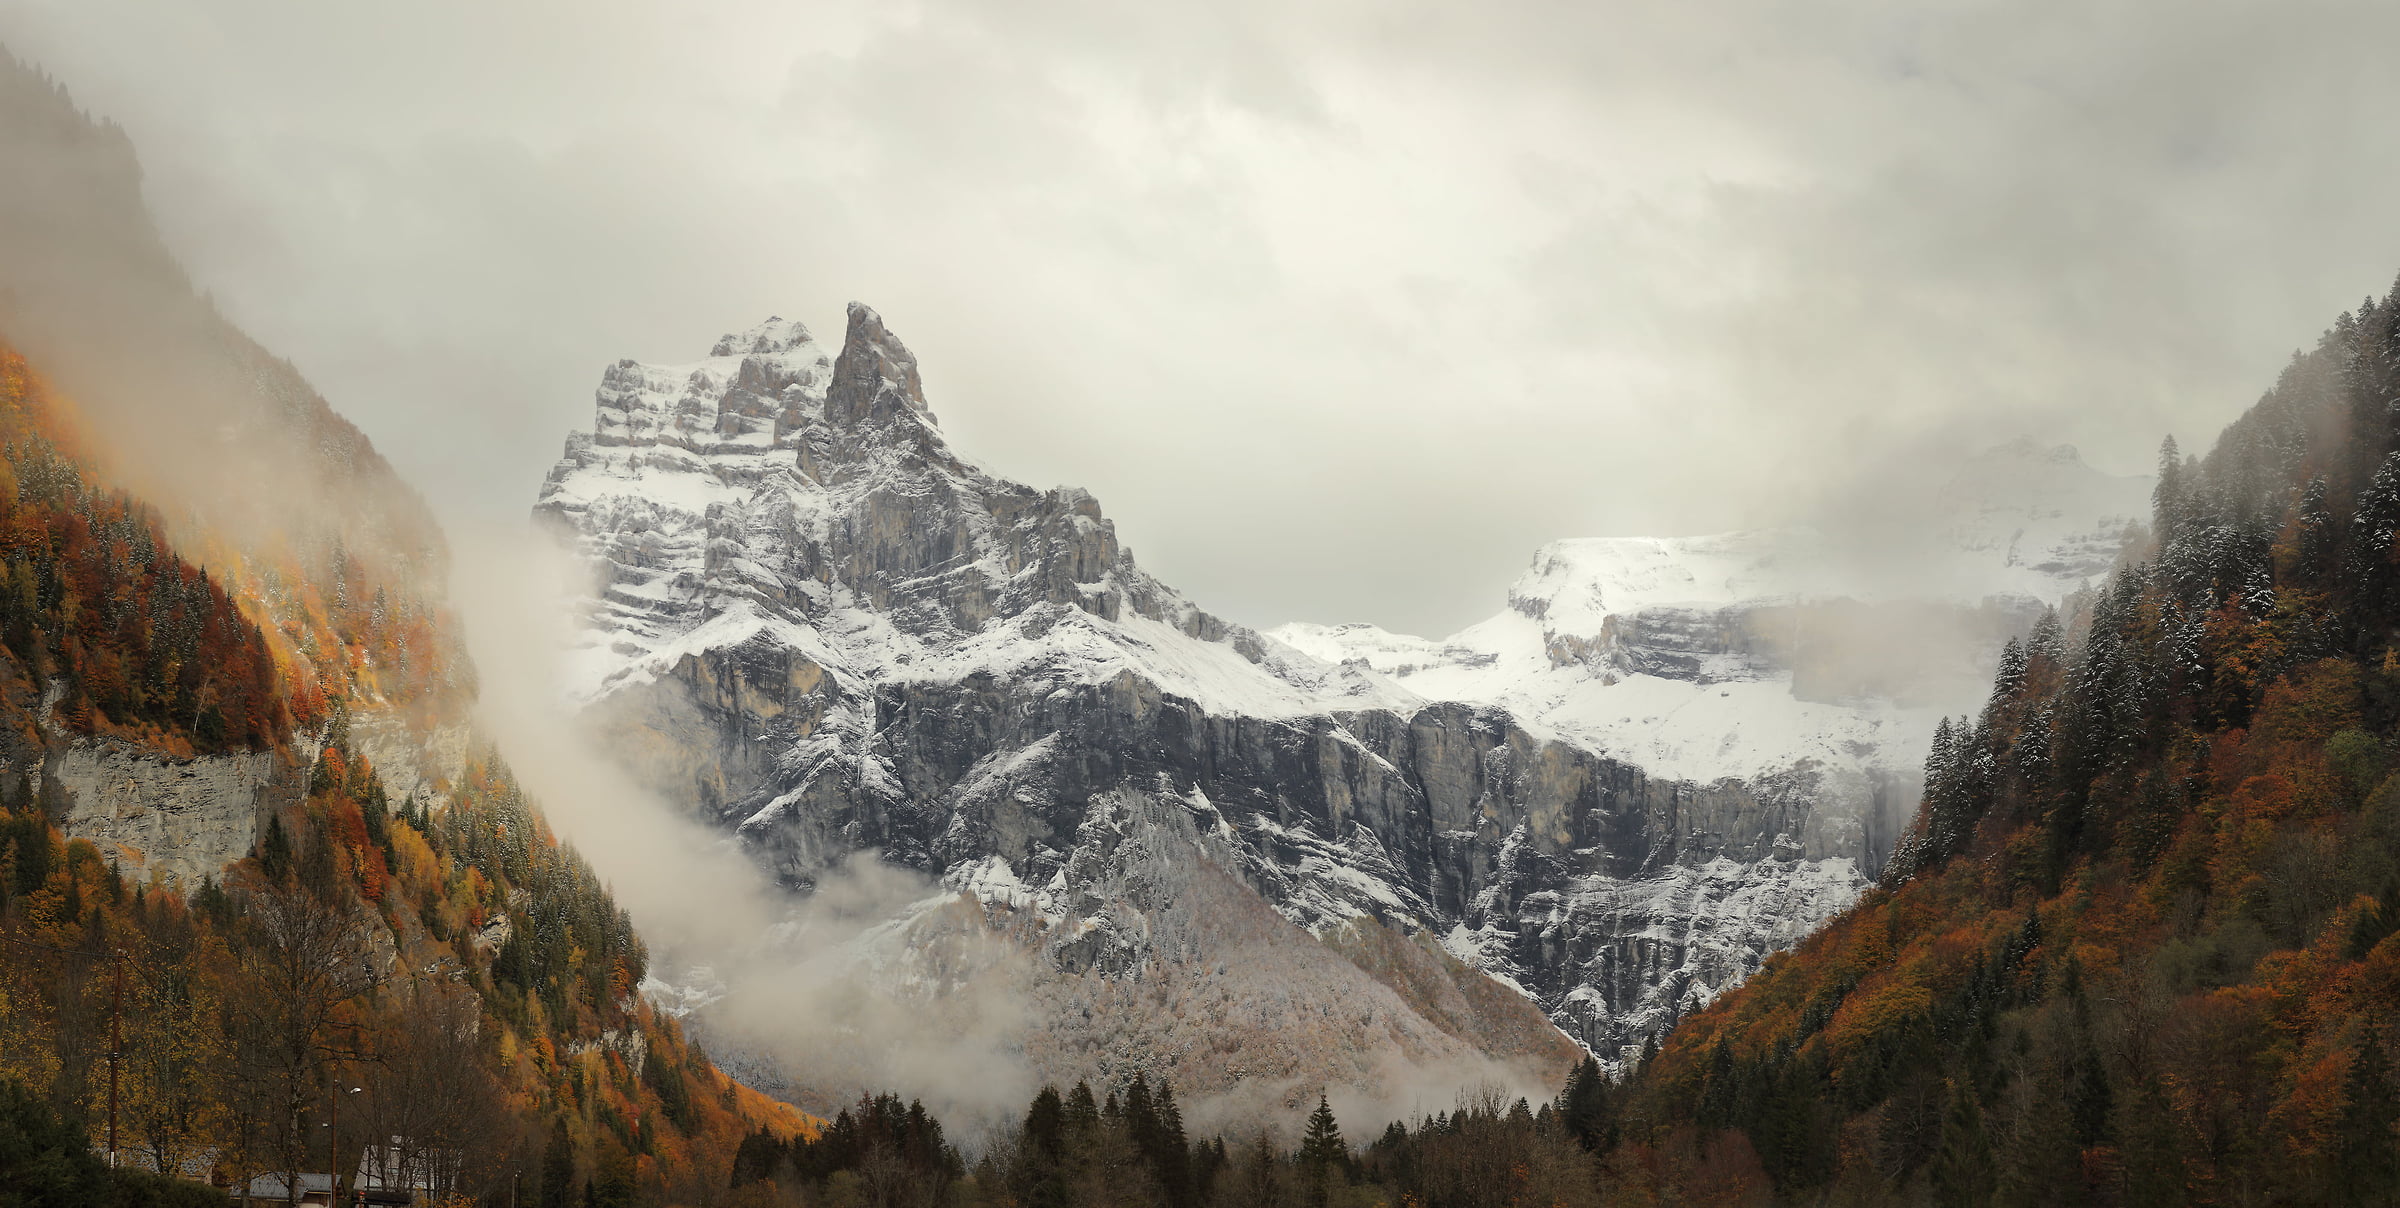 298 megapixels! A very high resolution, large-format VAST photo print of a mountain peak in autumn with fall foliage and a valley; landscape photograph created by Alexandre Deschaumes.